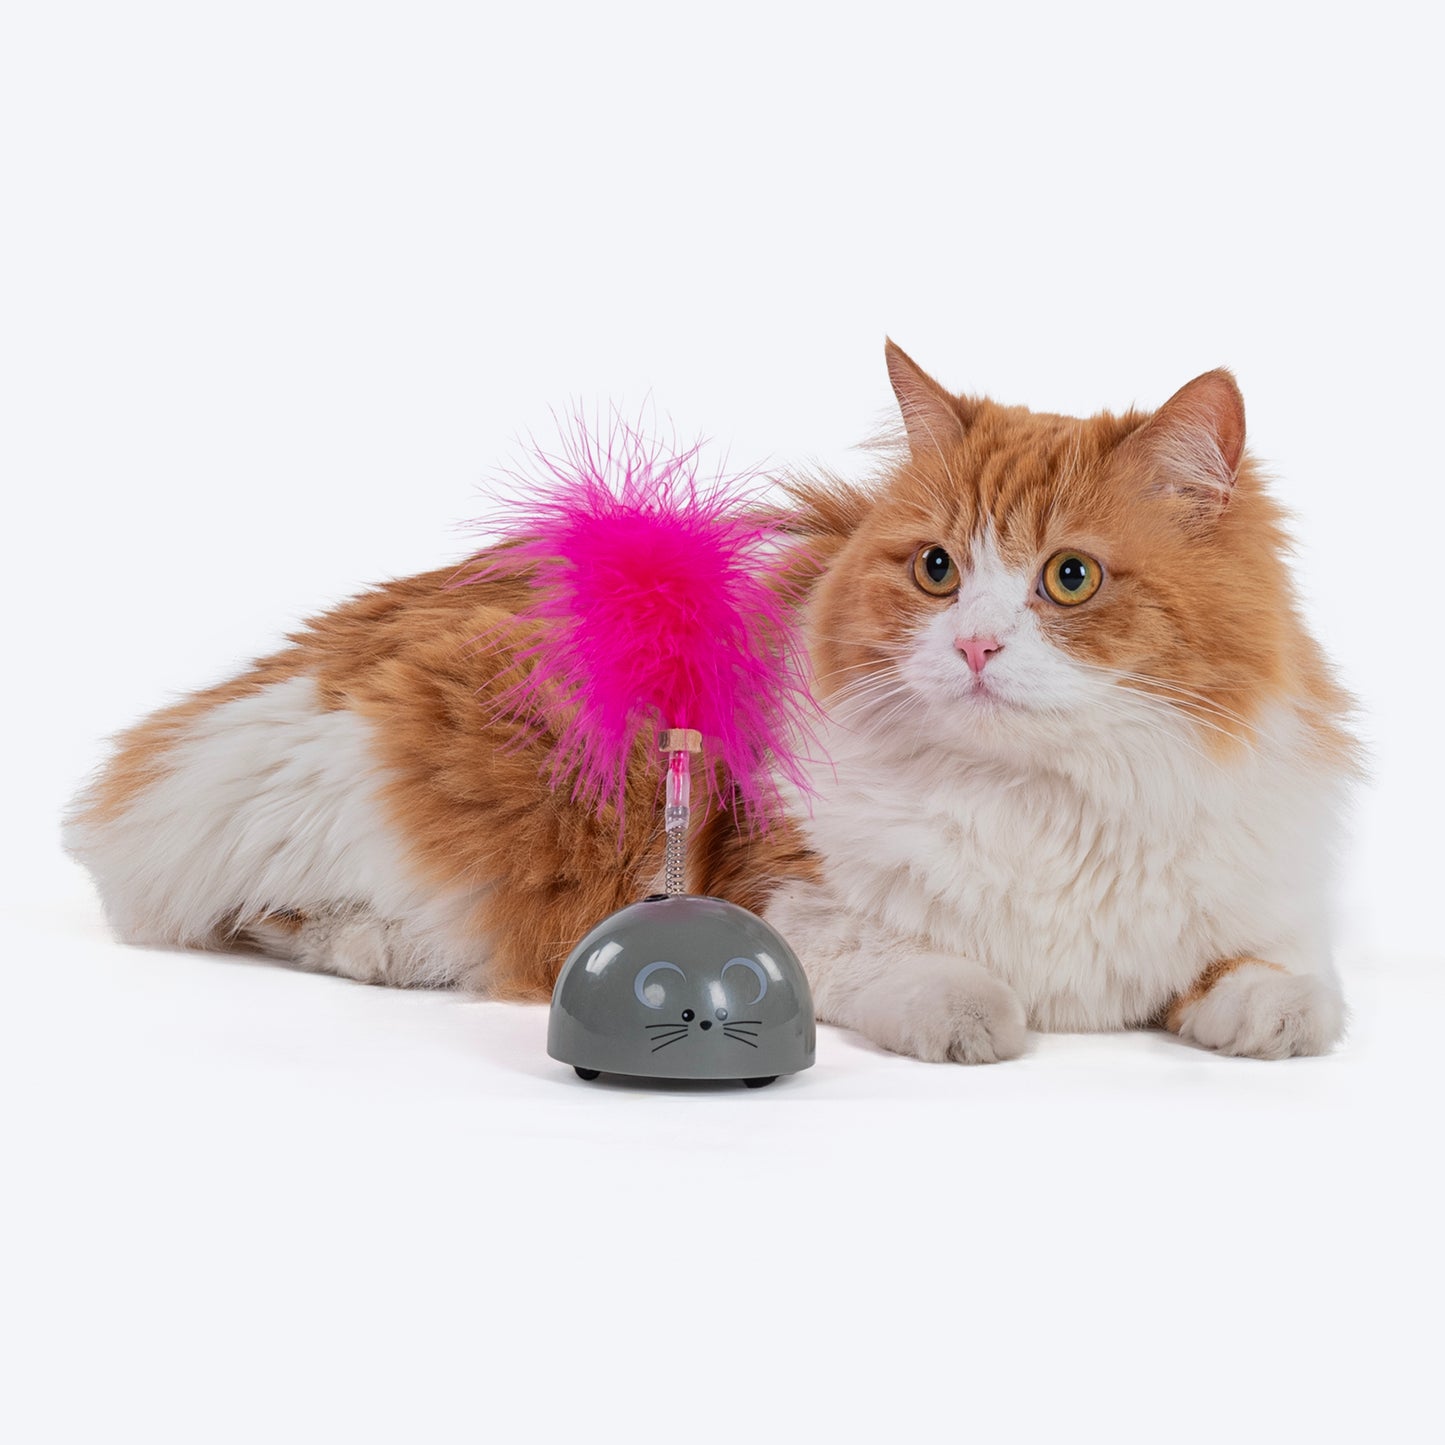 HUFT Purr Spin Toy With Sensor Interactive Toy For Cat_04